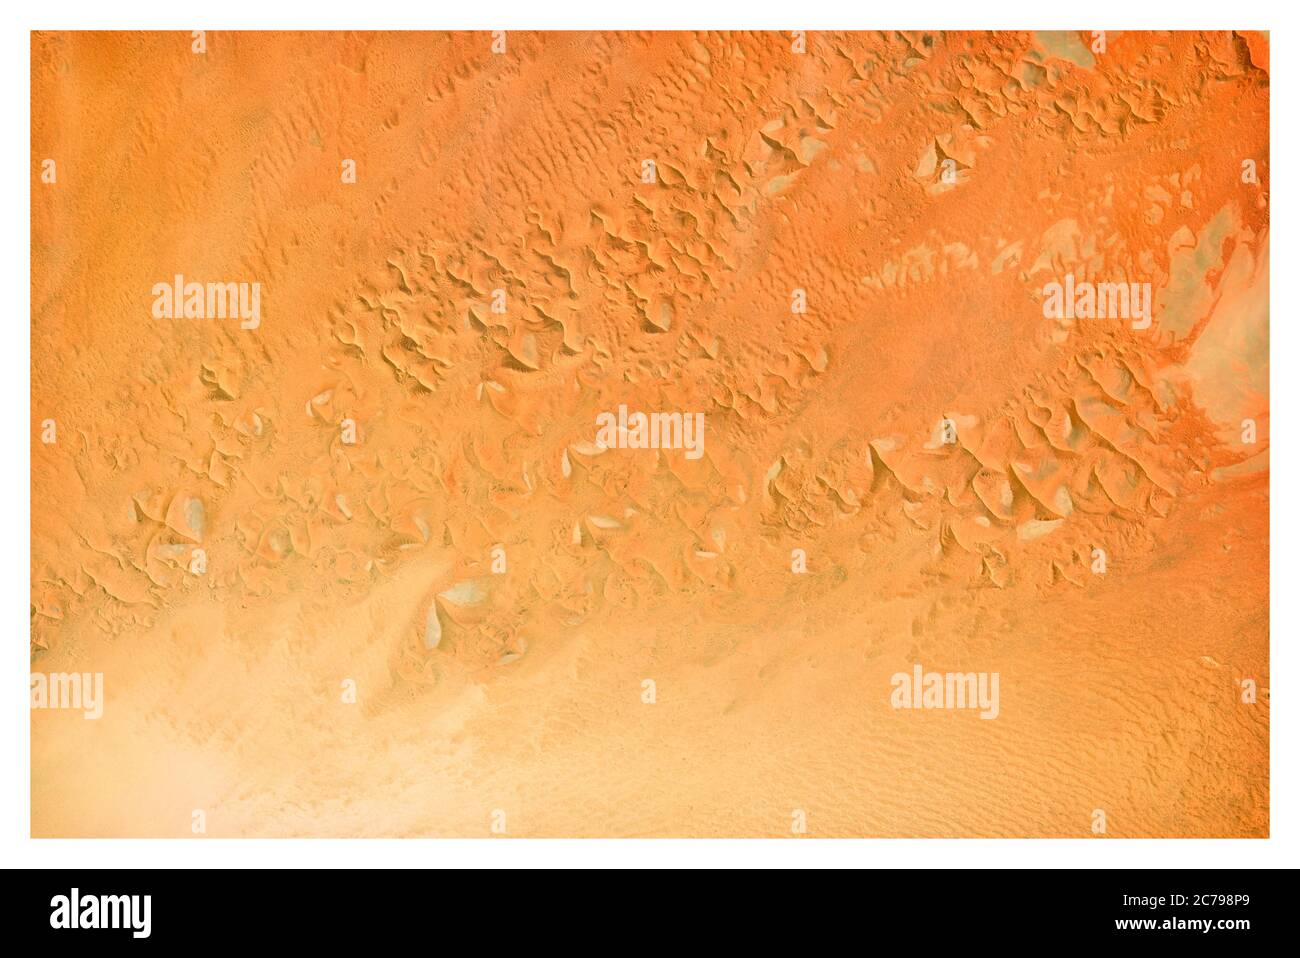 Satellite view of Namibia desert, landscape and mountains. Nature and aerial view. Flower shapes. Global warming and climate change Stock Photo